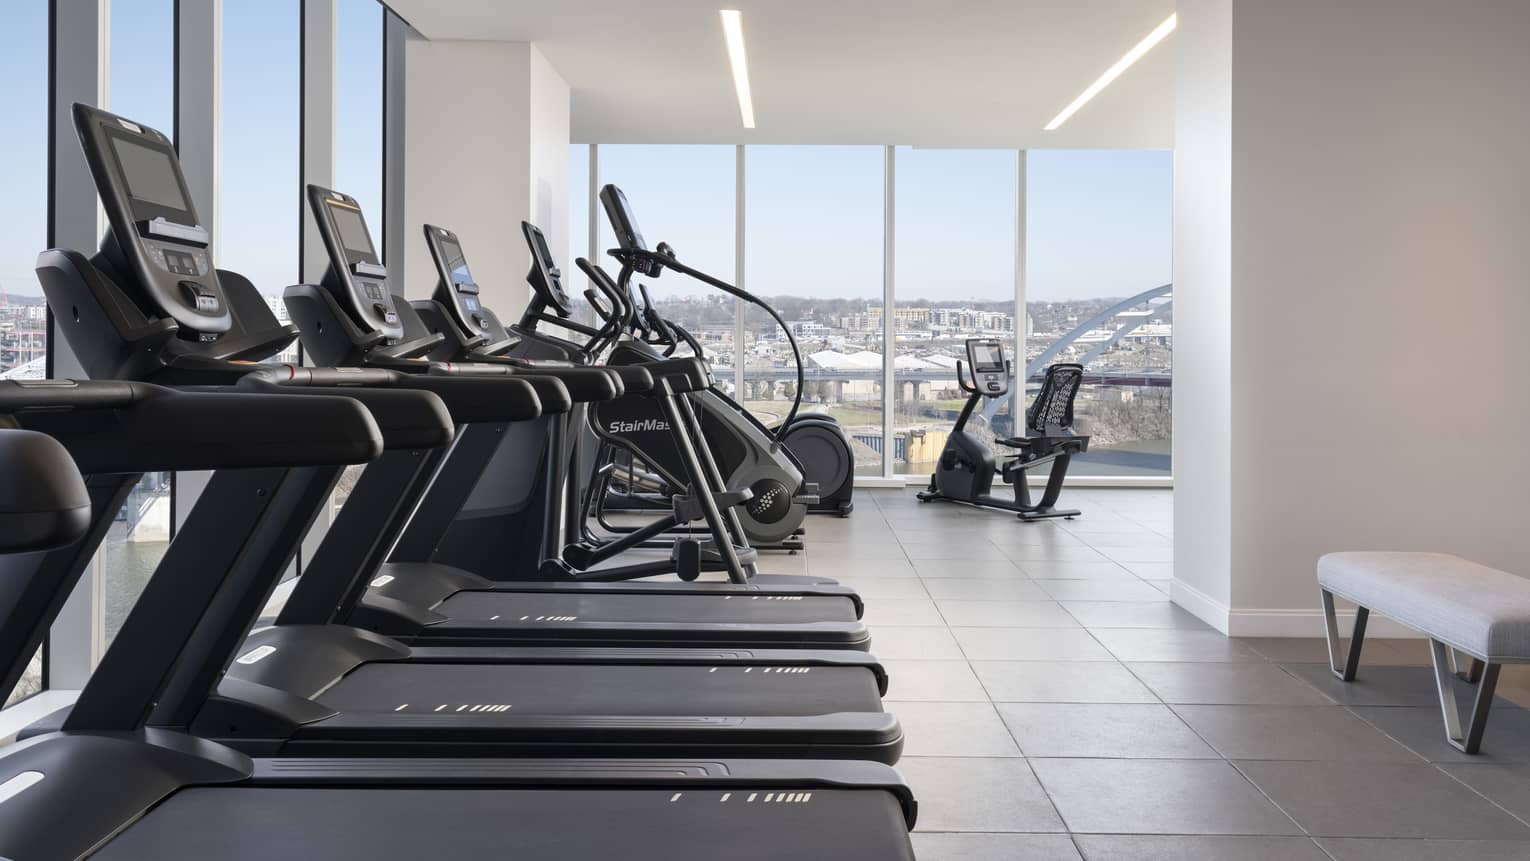 A fitness centre with cardio machines and large windows.